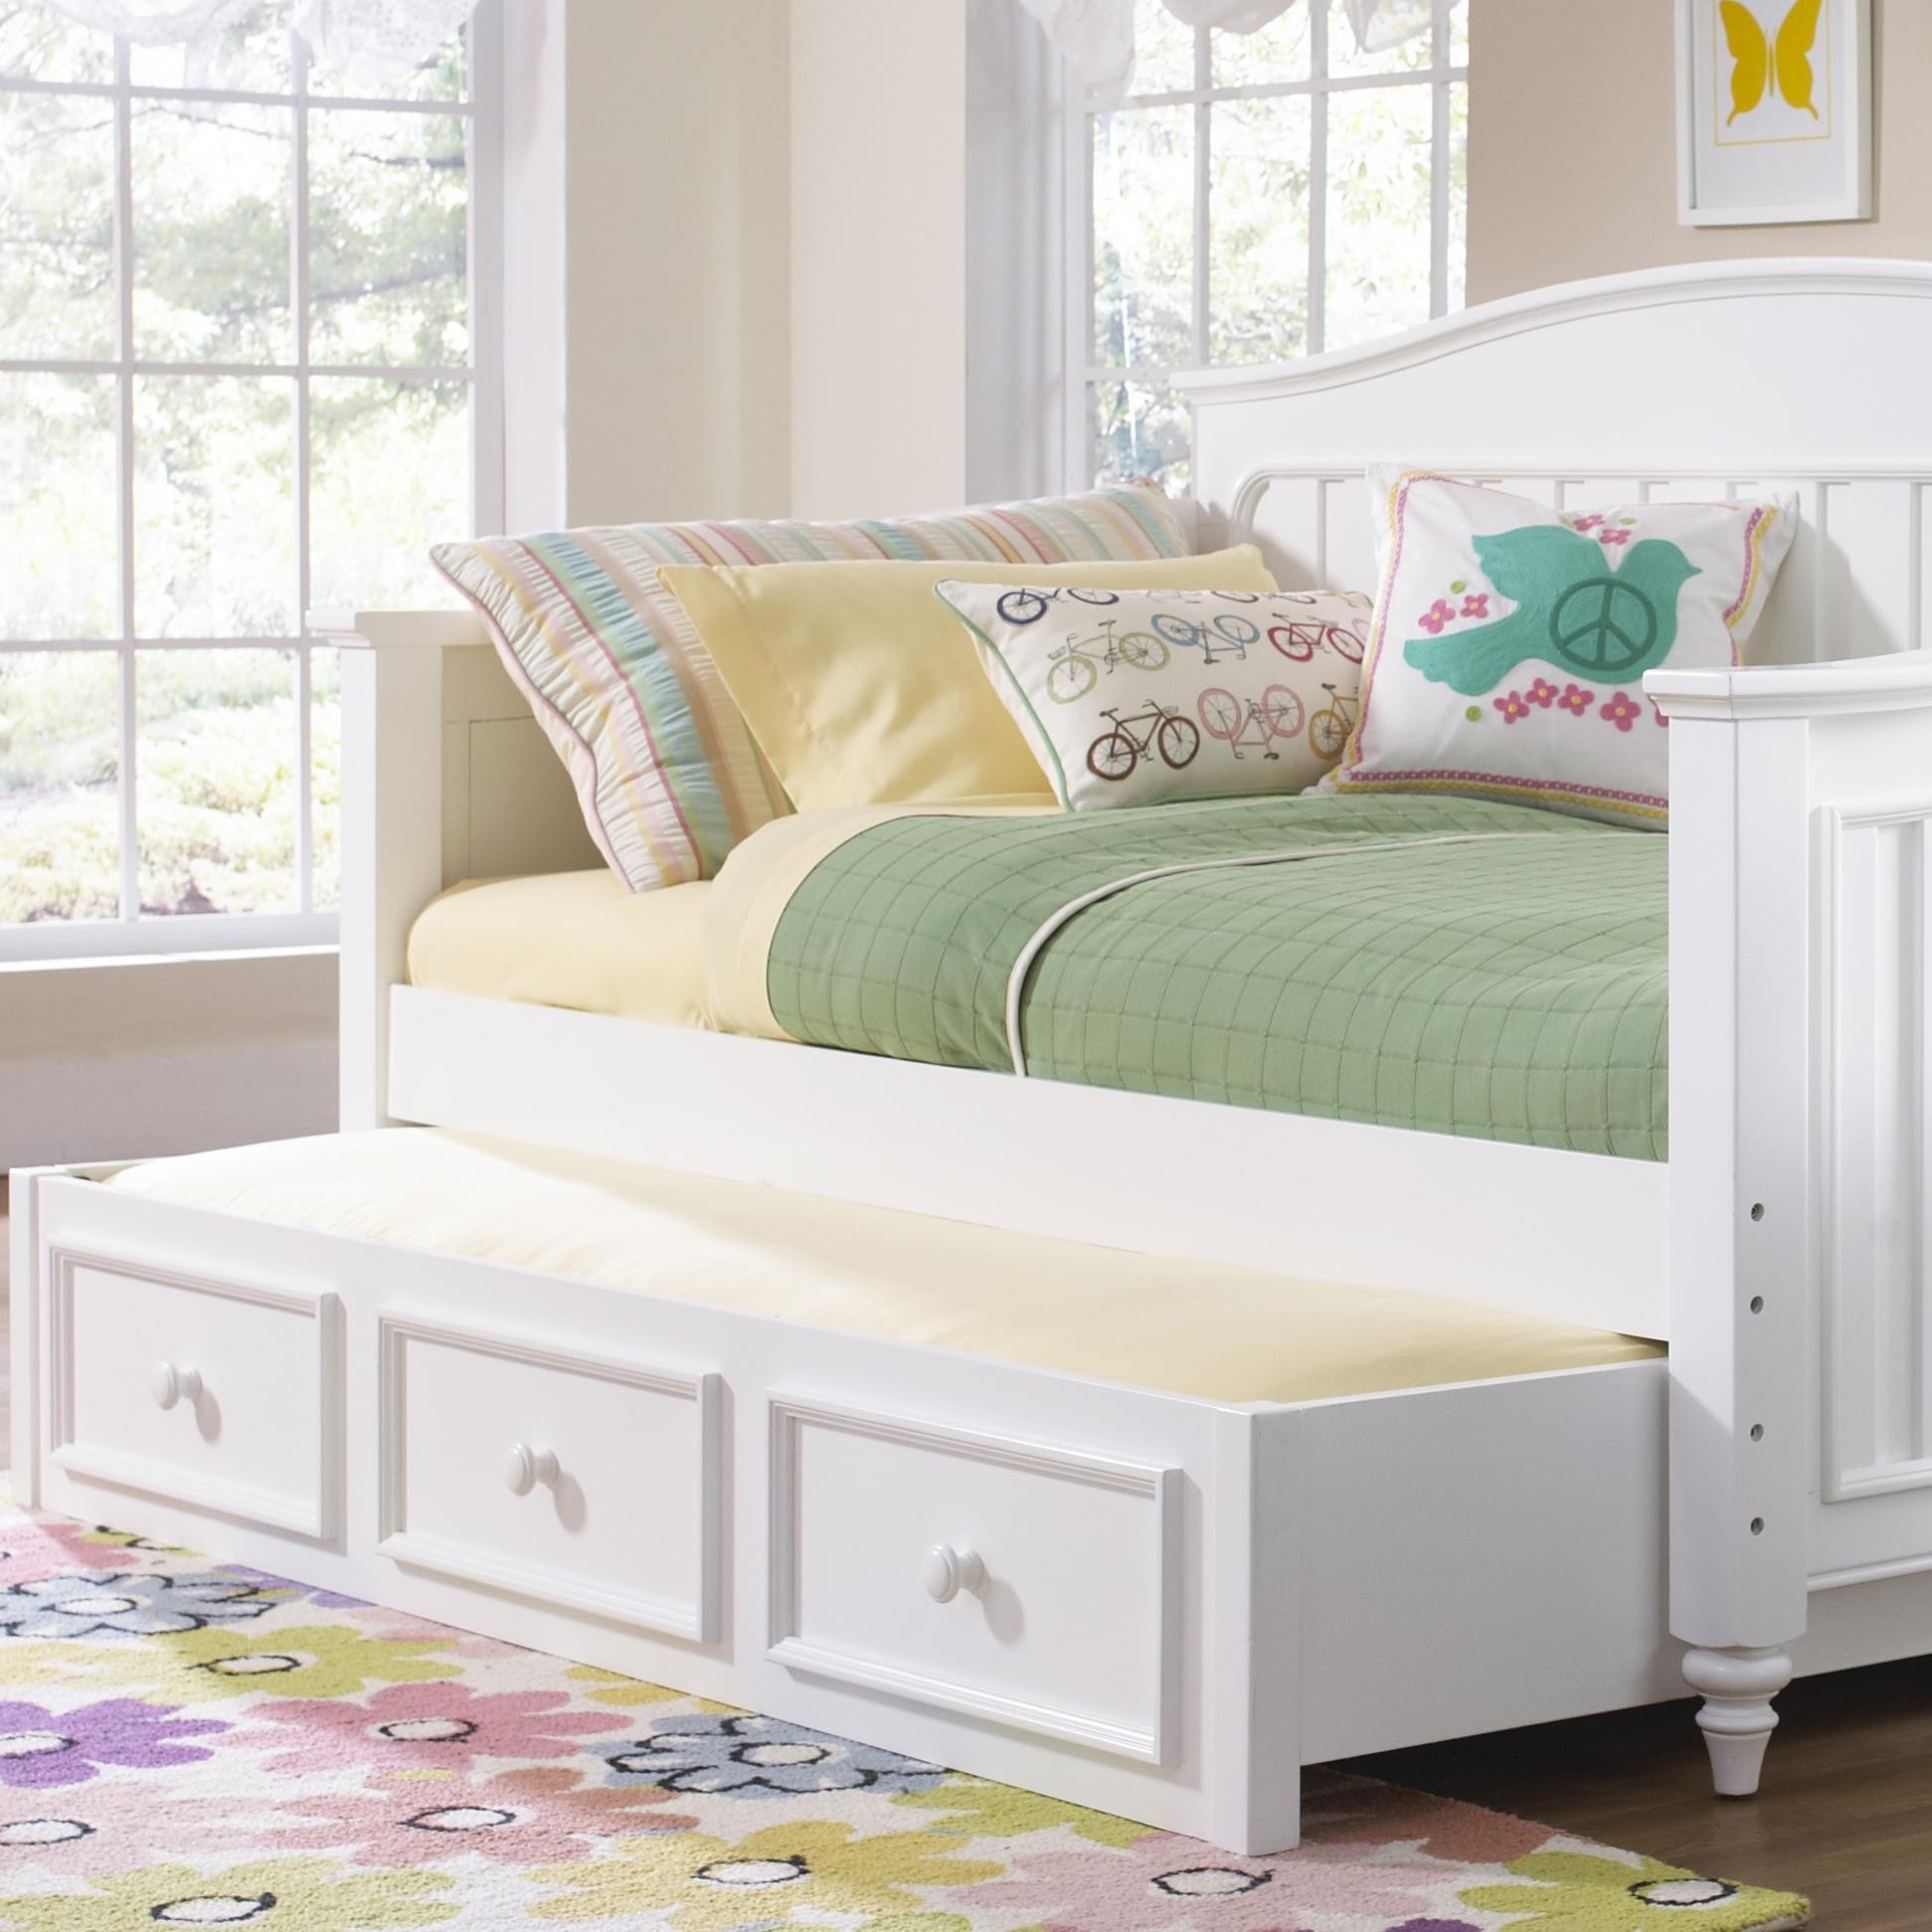 Samuel lawrence summertime youth white day bed with